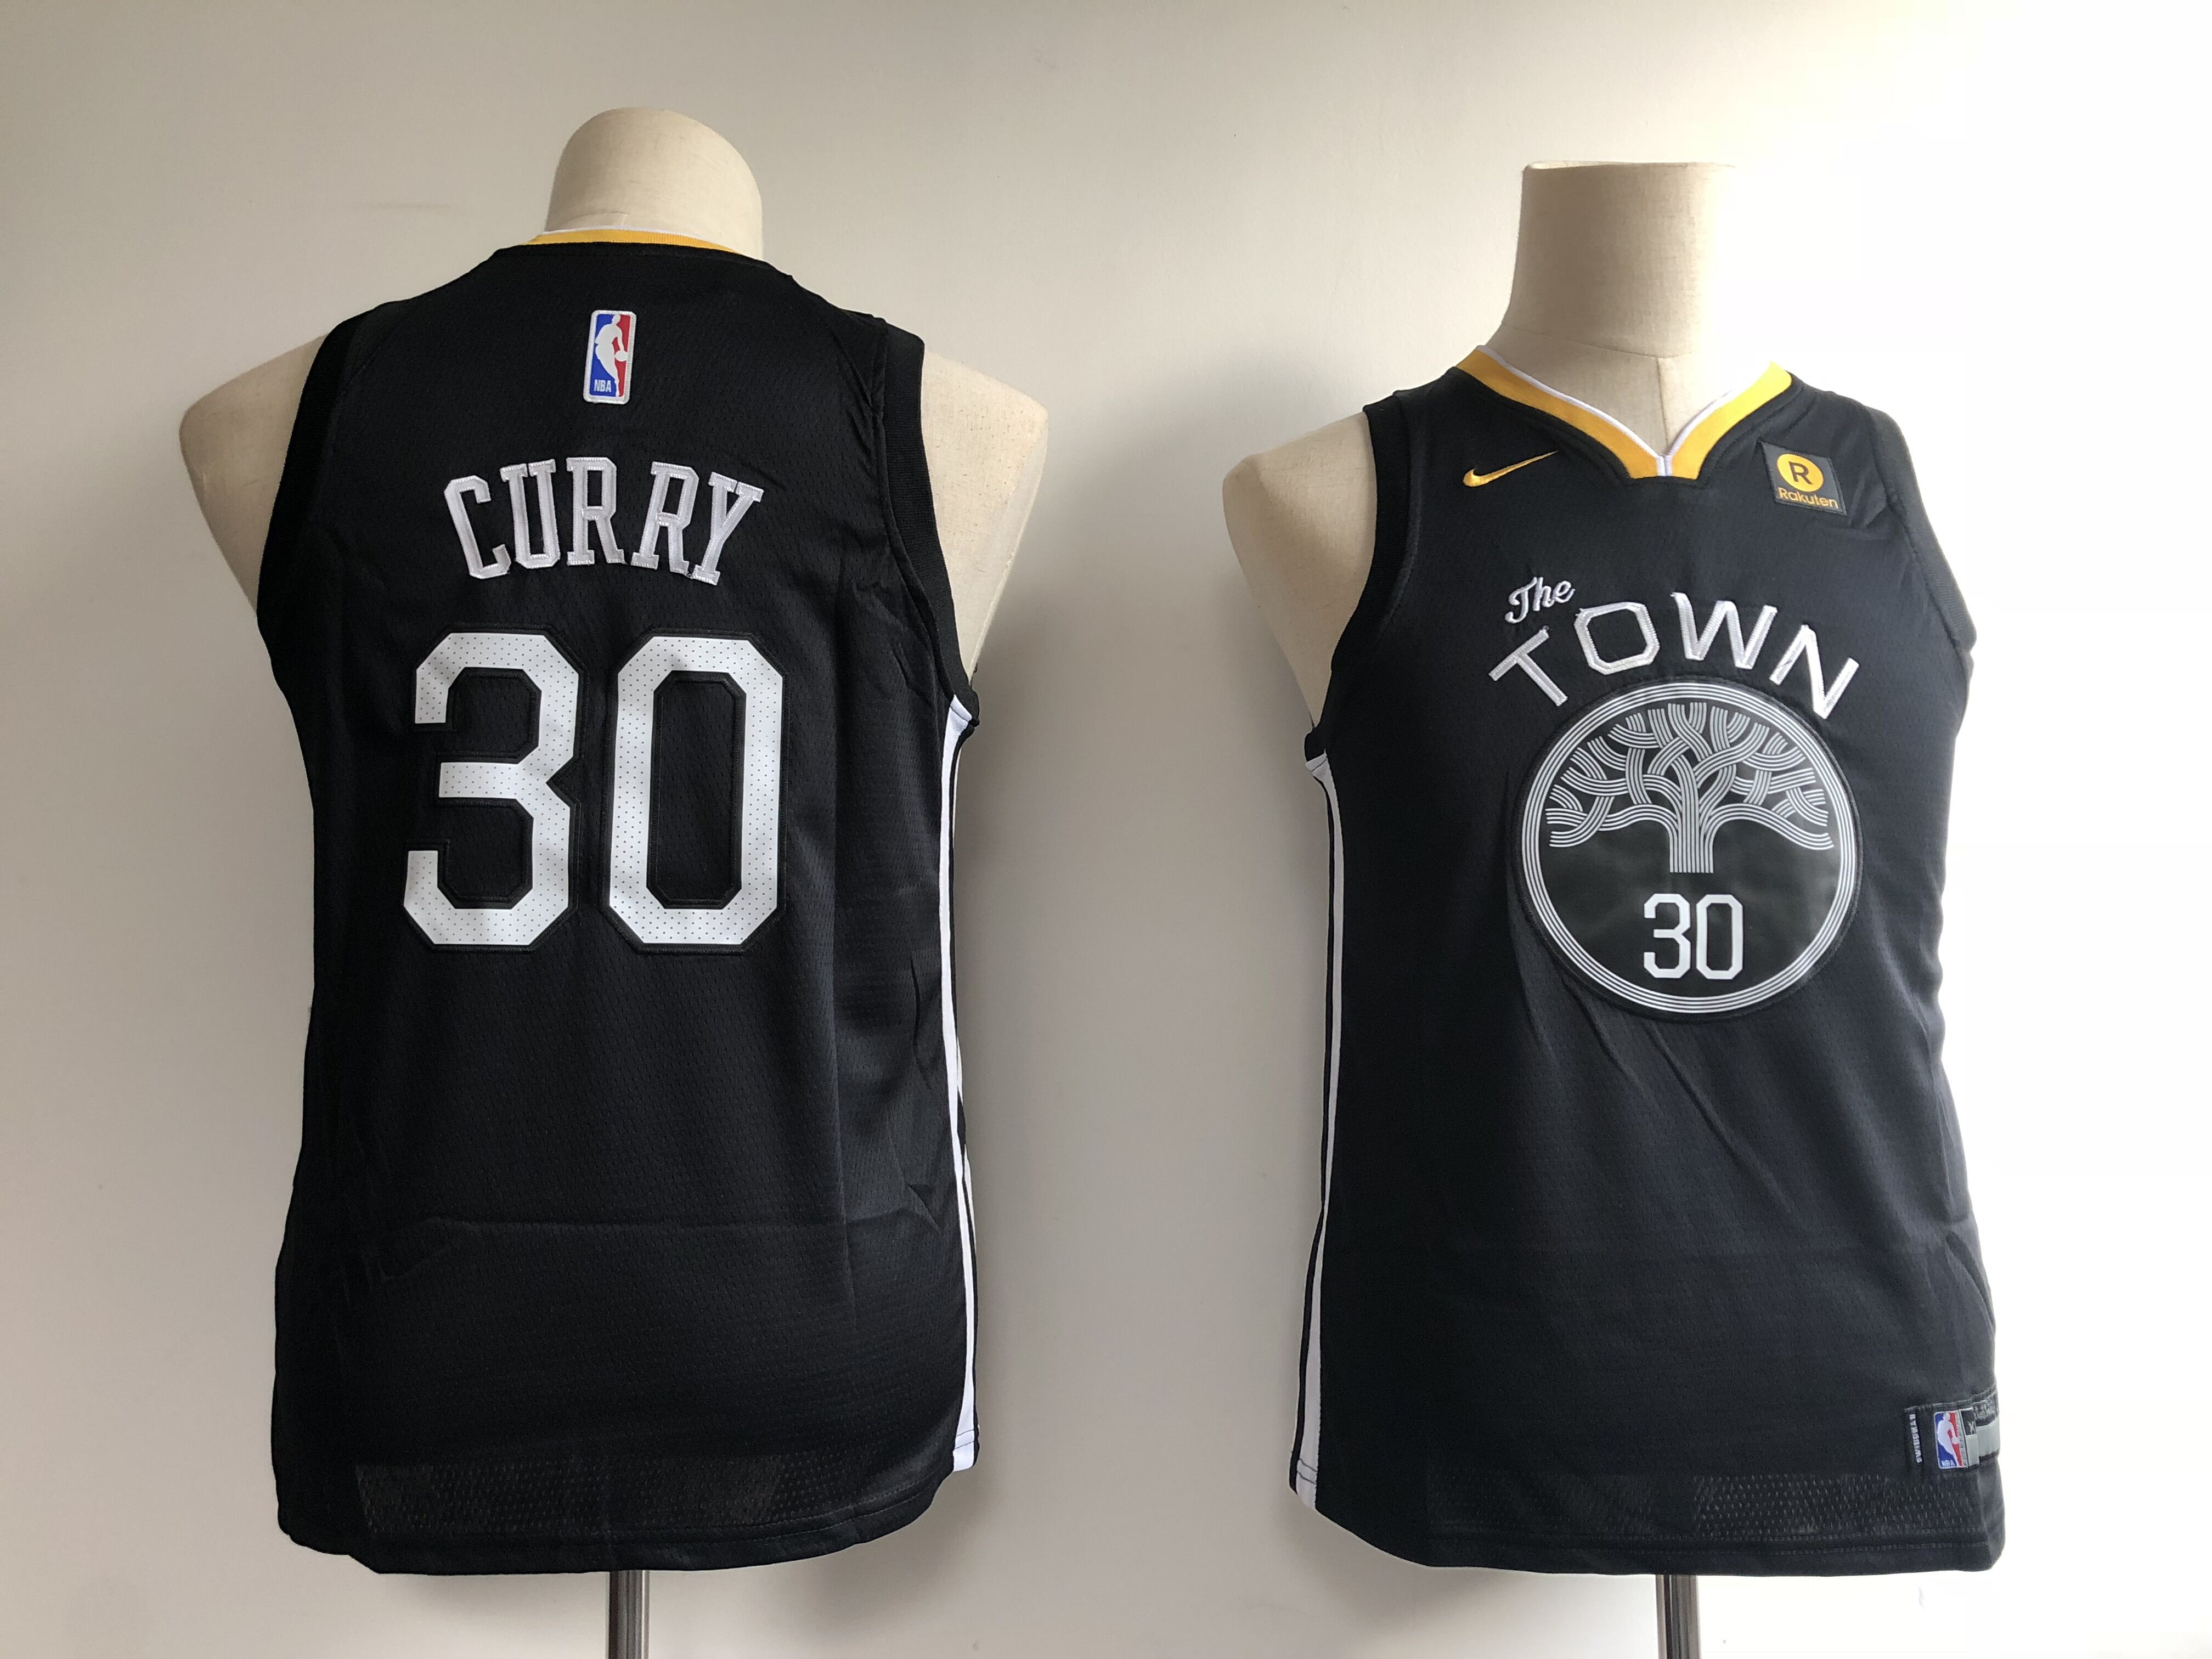 Youth Golden State Warriors #30 Curry black limited NBA Nike Jerseys